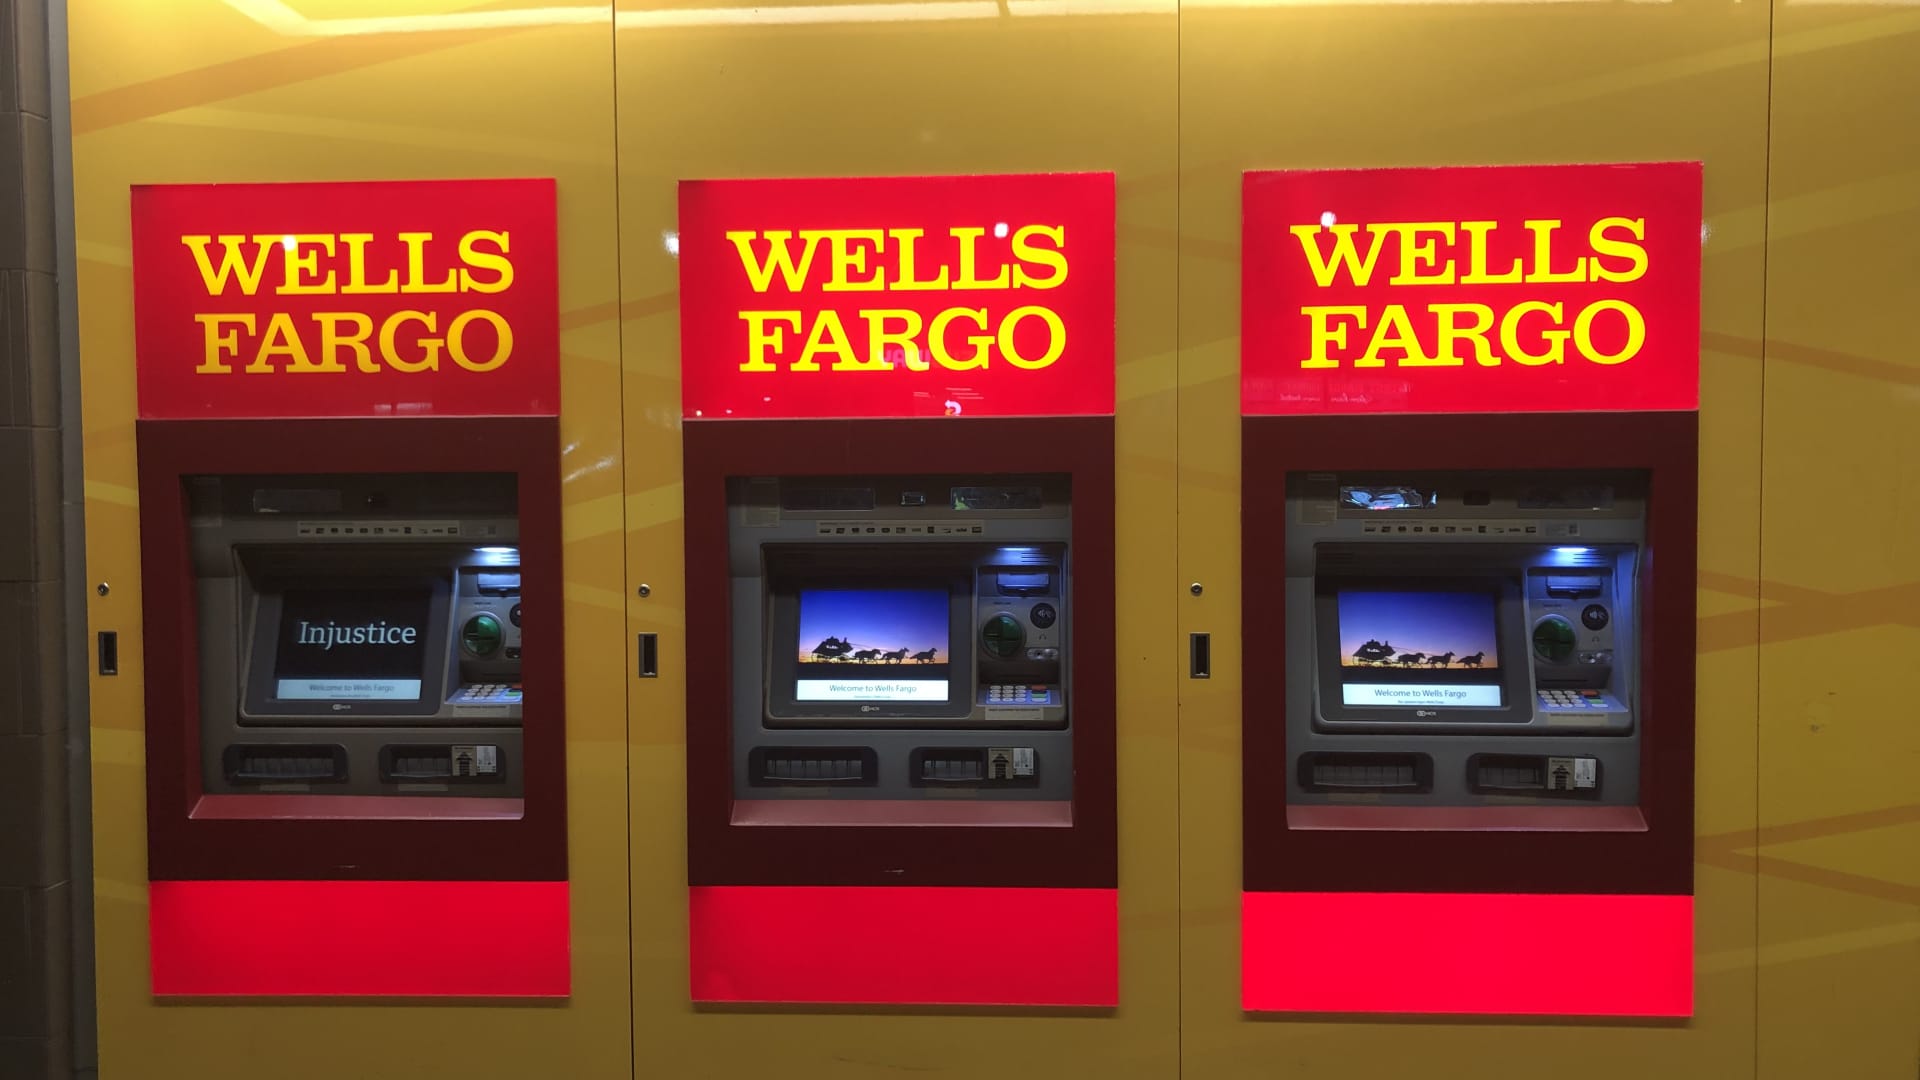 Wells Fargo reports higher fourth-quarter profit, helped by higher interest rates and cost cuts